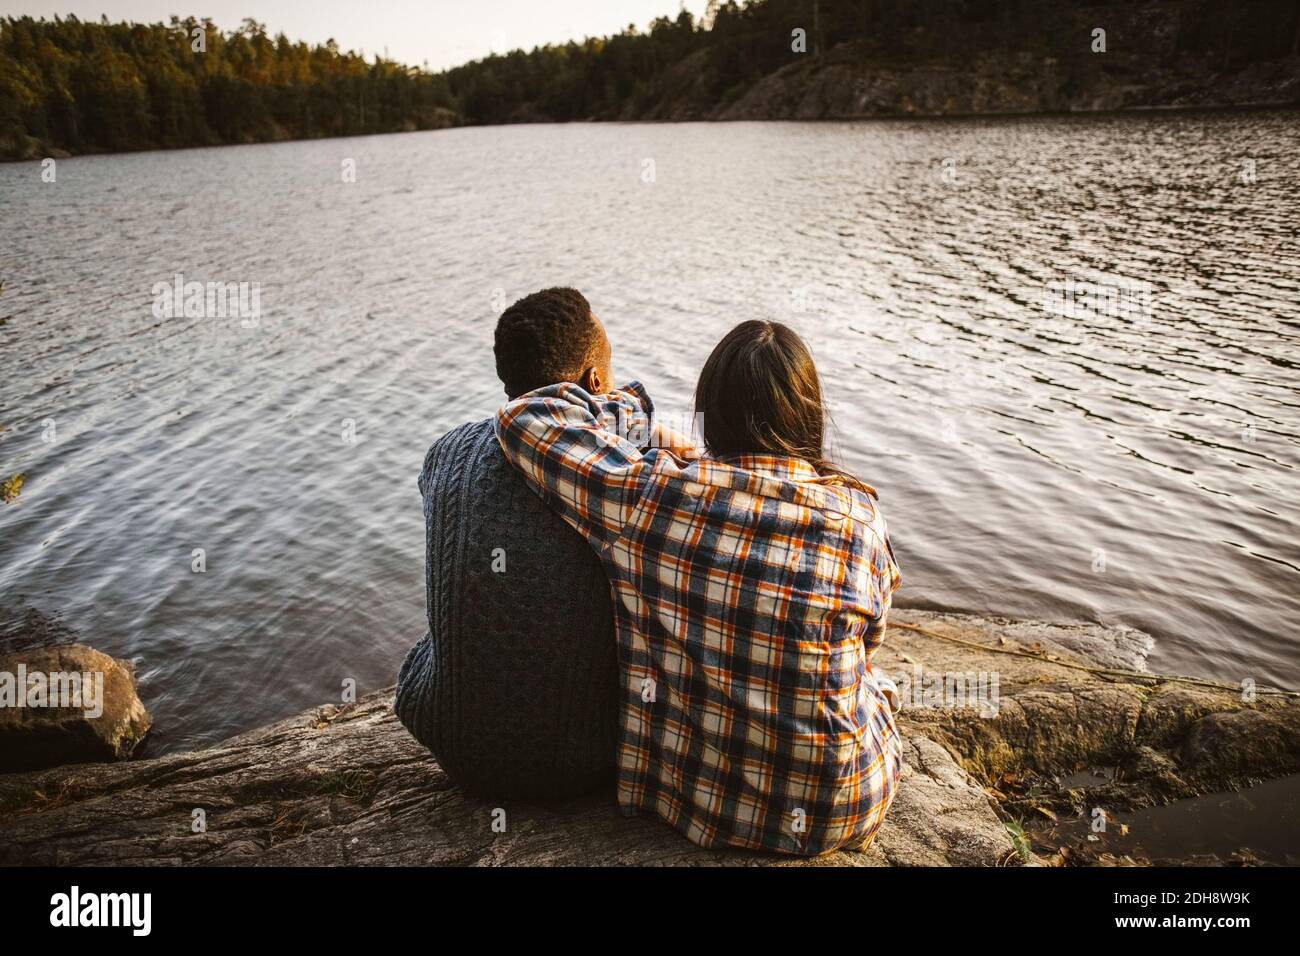 Rear view of man and woman sitting by lake in forest Stock Photo